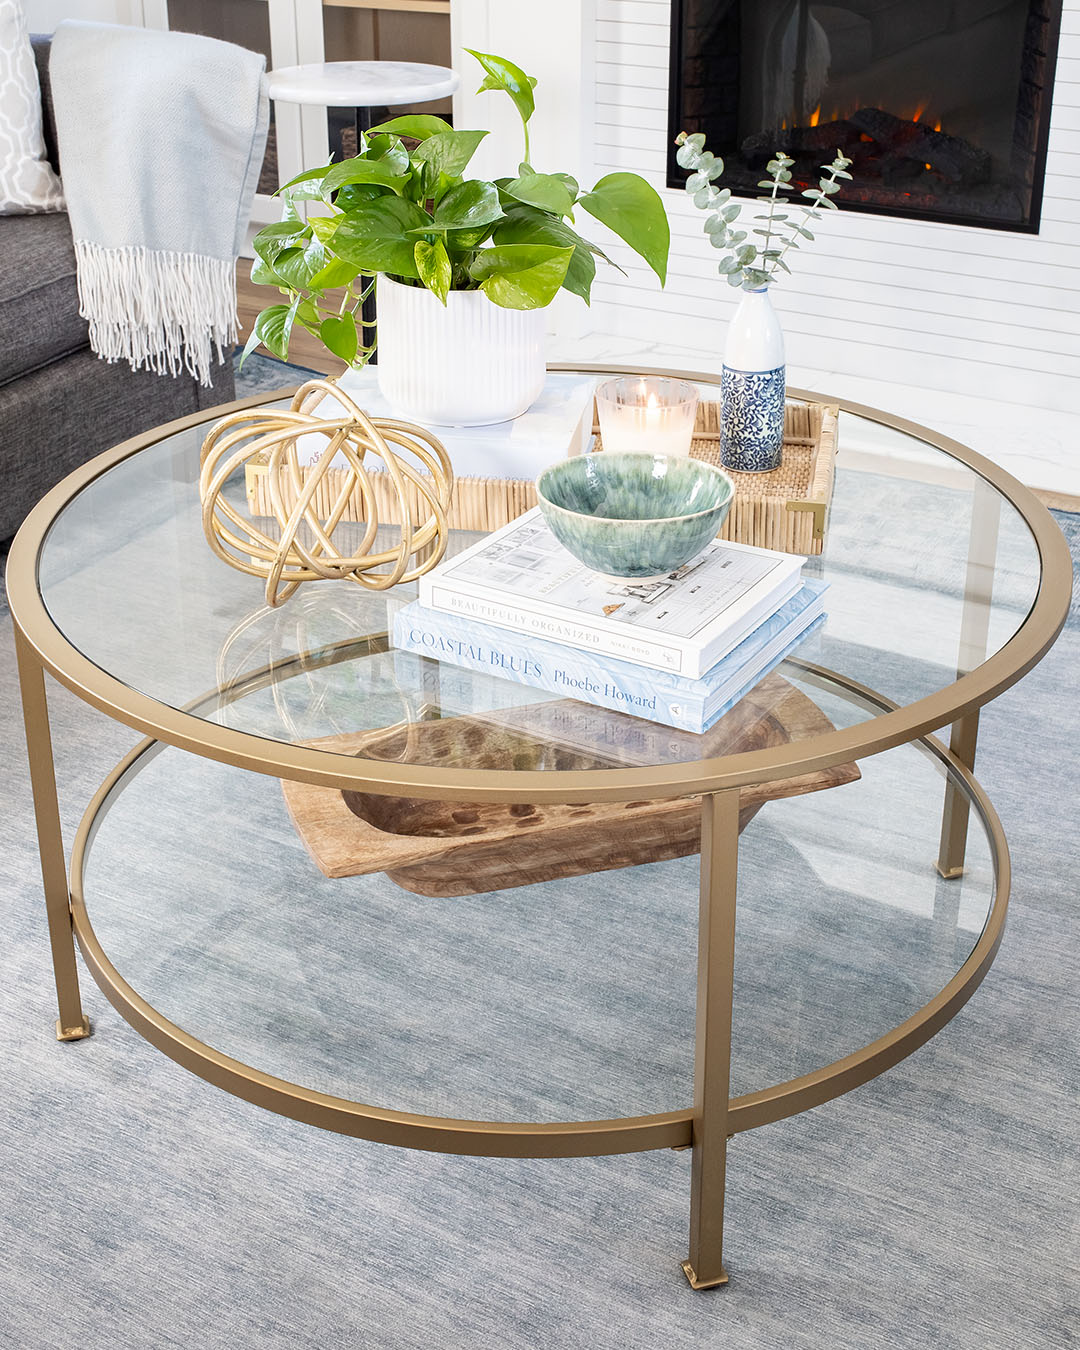 Styling A Small Round Coffee Table, How To Style A Small Round Coffee Table